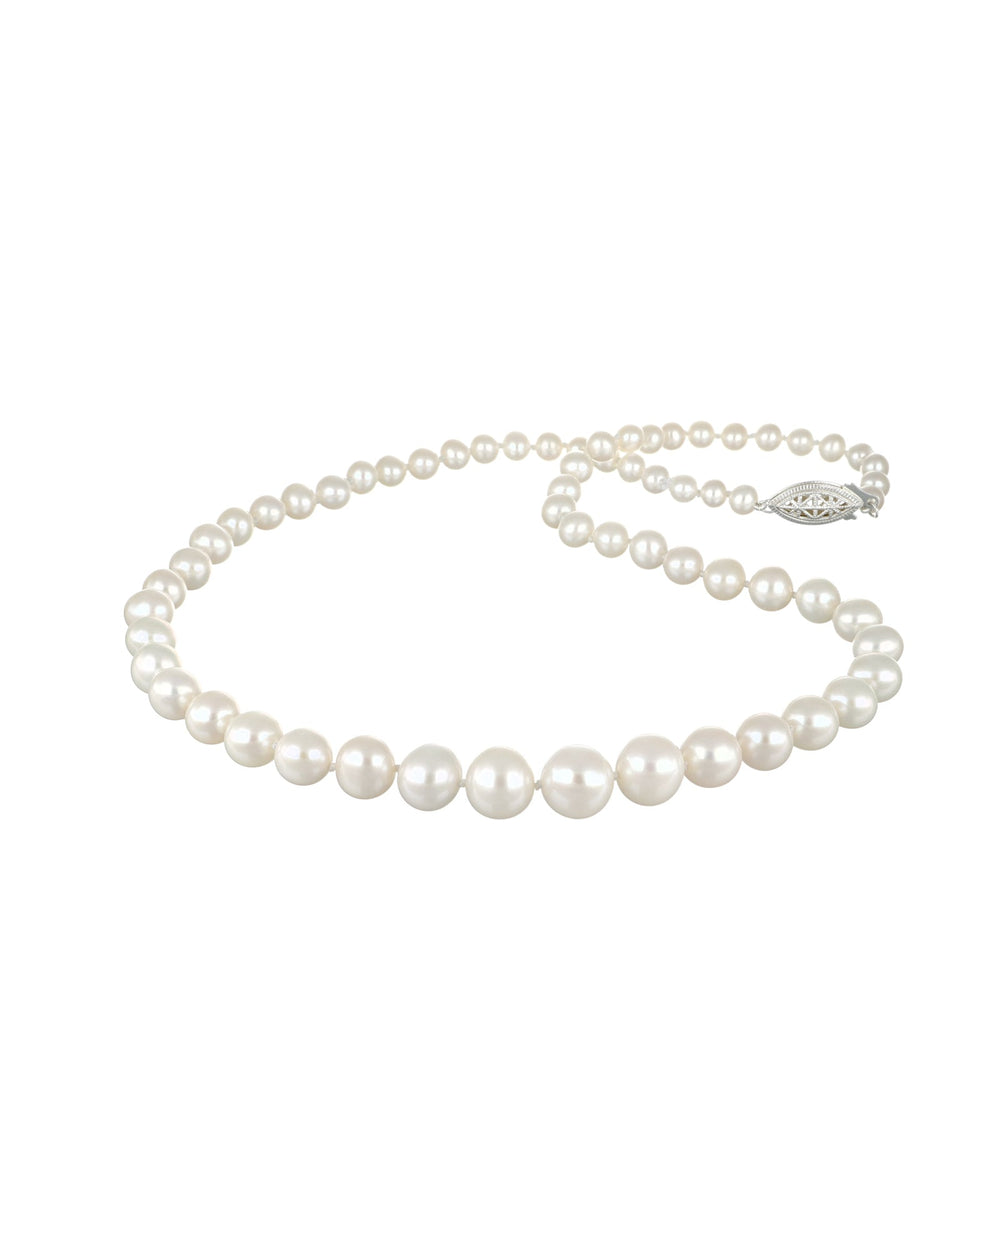 5-10mm Graduated Freshwater Pearl Necklace